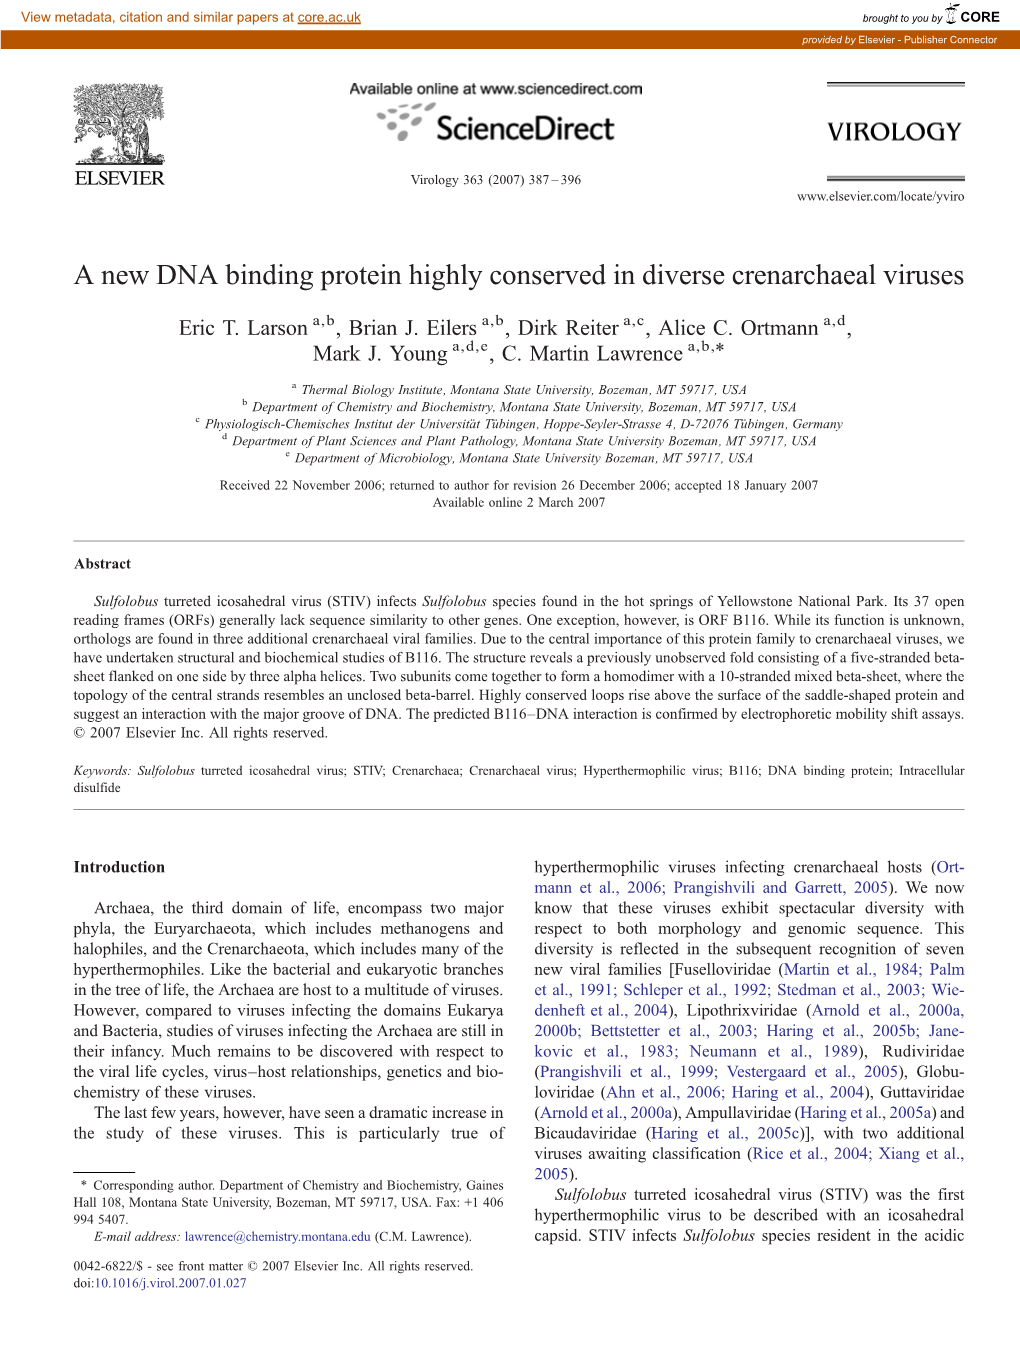 A New DNA Binding Protein Highly Conserved in Diverse Crenarchaeal Viruses